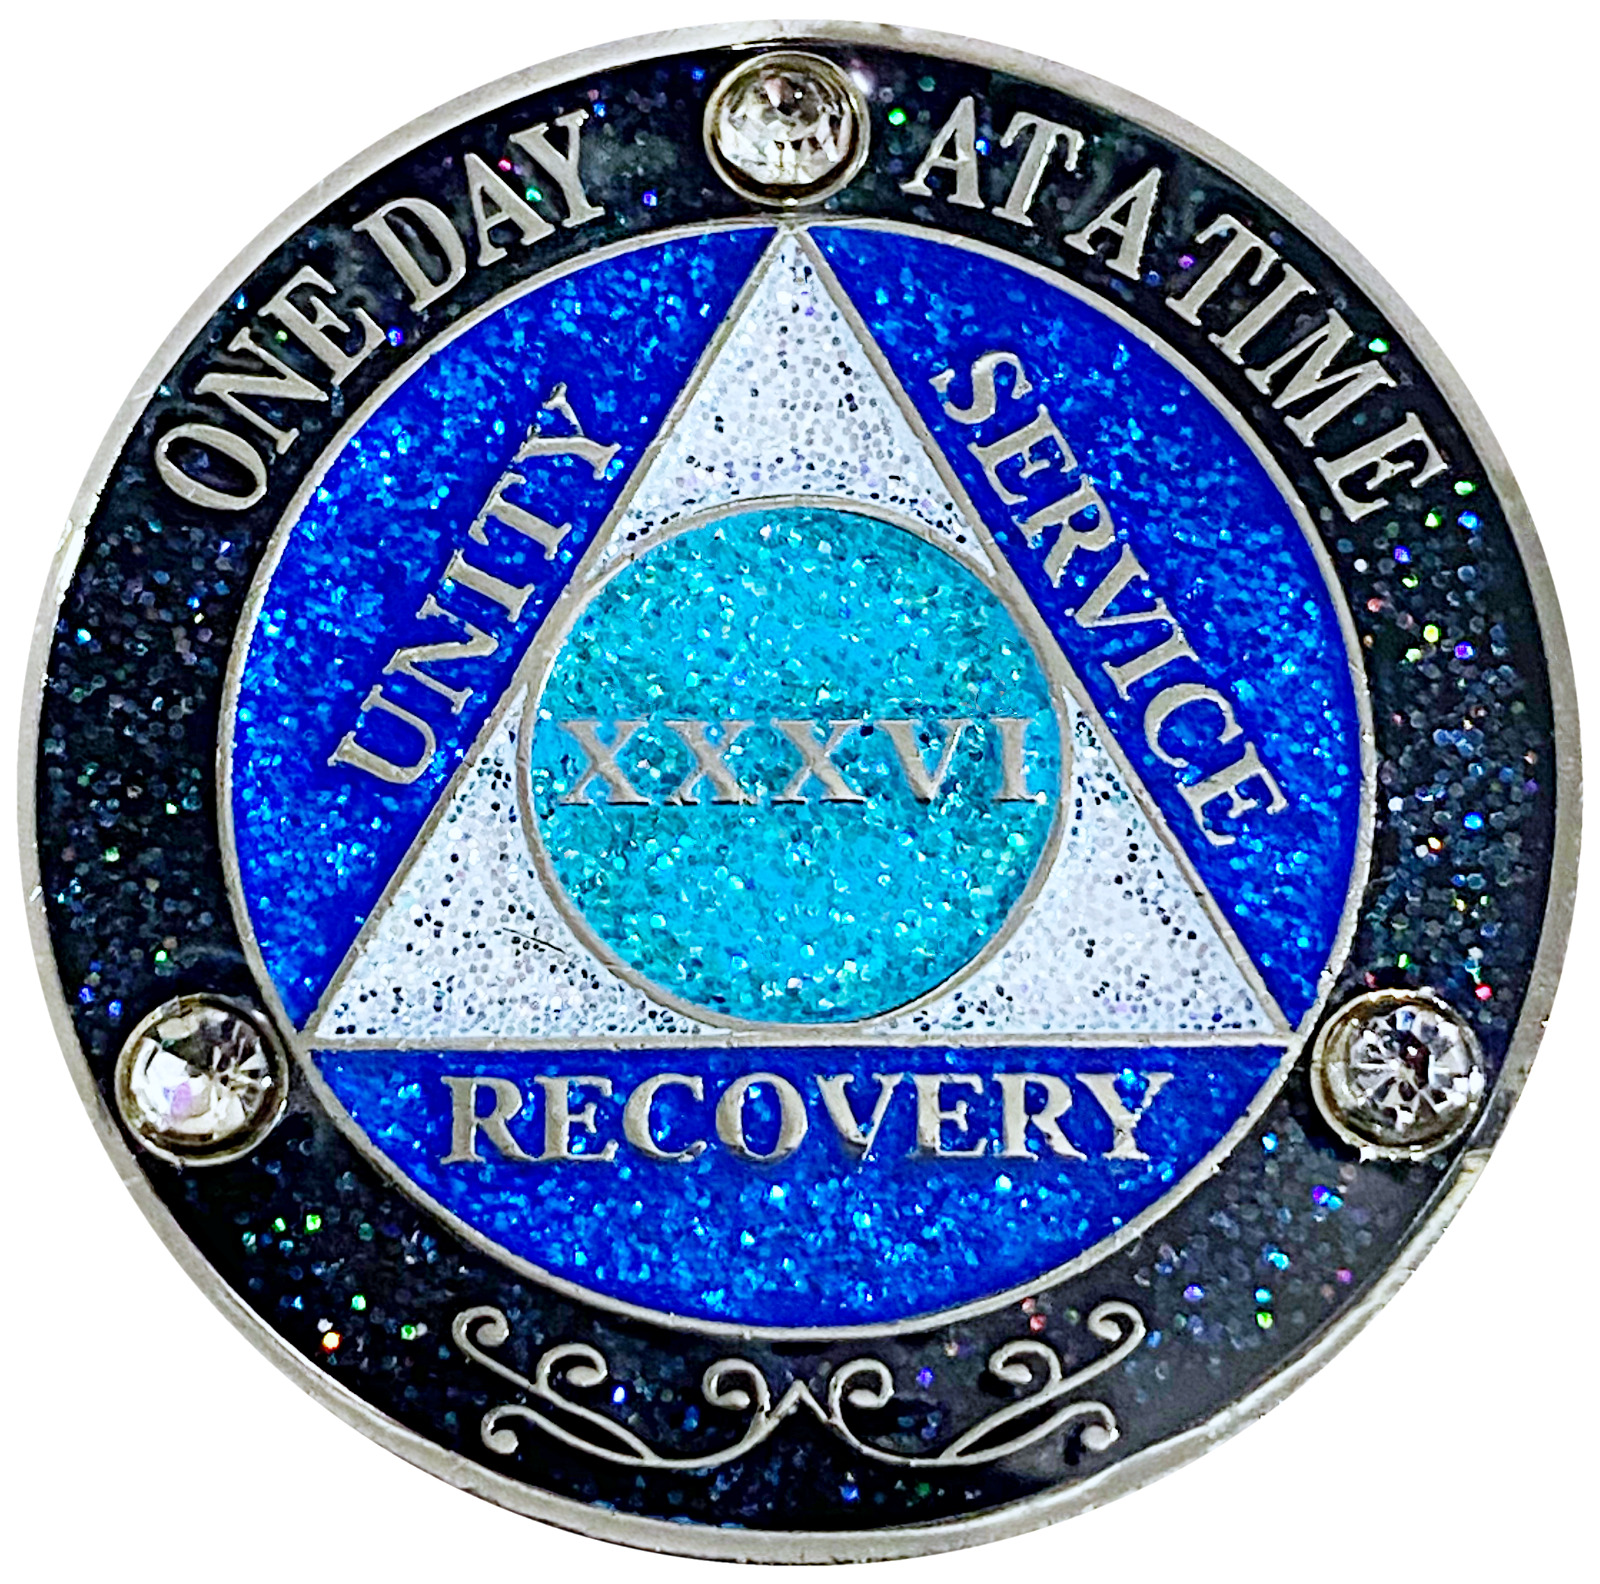 AA 36 Year Crystals & Glitter Medallion, Silver, Blue Color & 3 Crystals